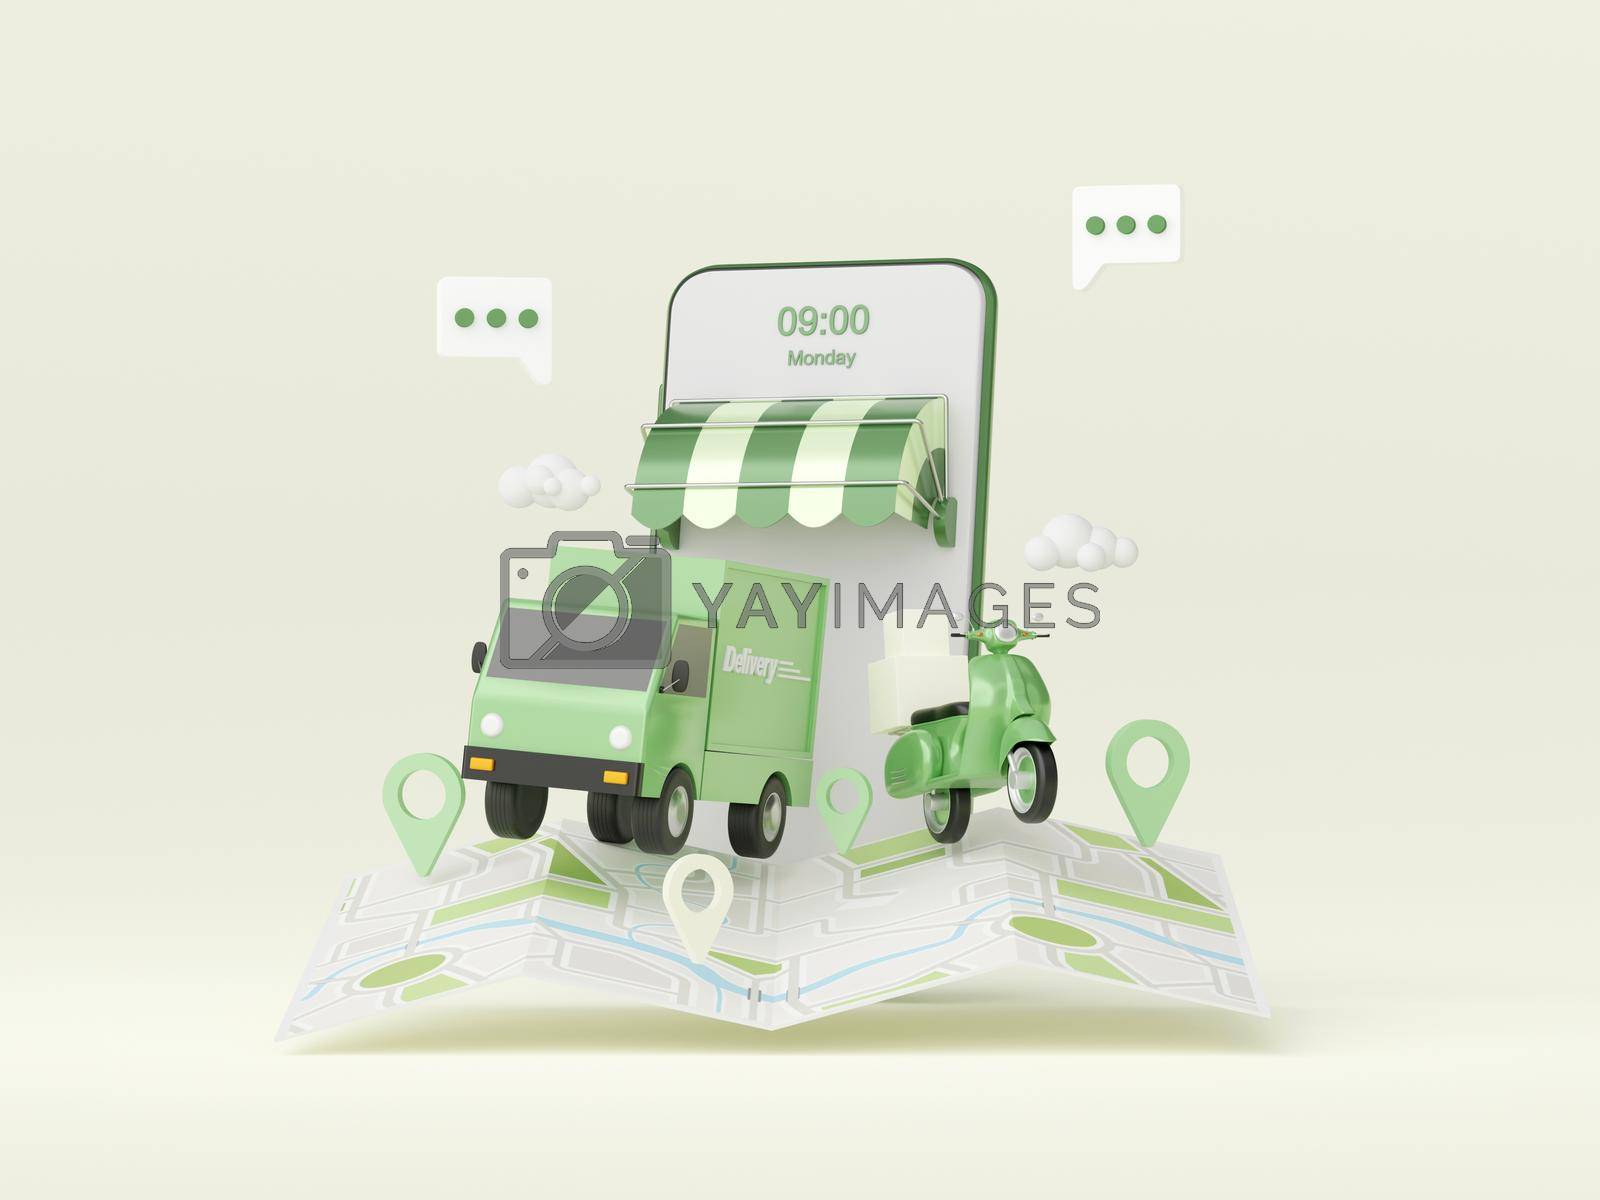 Royalty free image of Delivery service on mobile application, Transportation delivery by truck or scooter, 3d illustration by nutzchotwarut